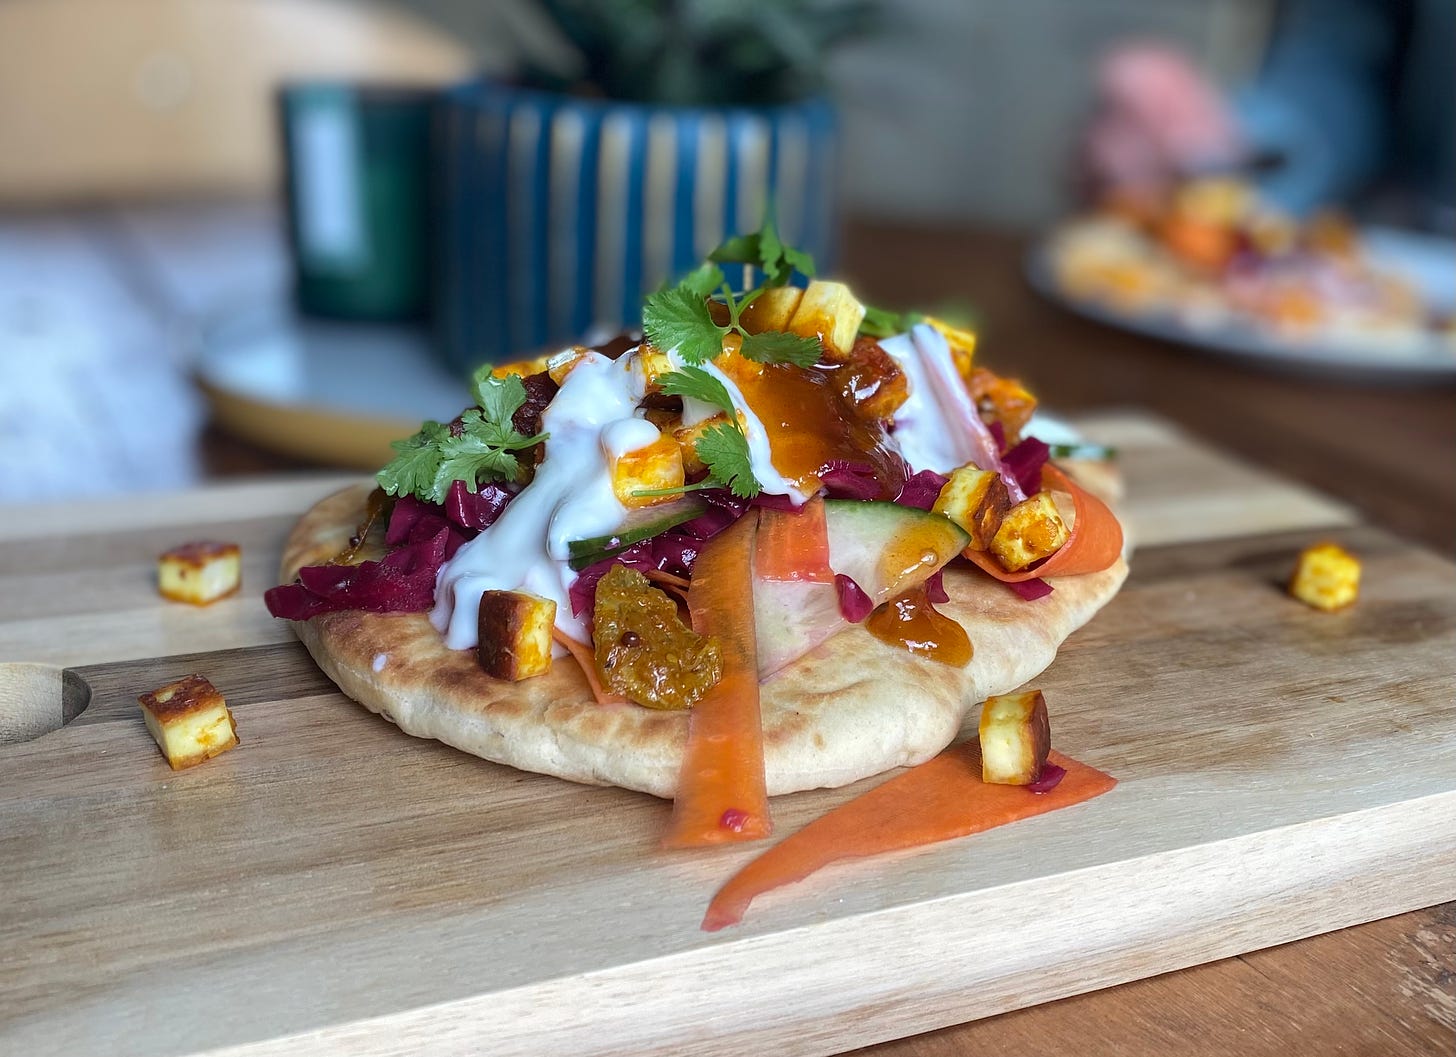 Wooden board with a naan bread topped with carrot ribbons, cucumber, cubed paneer, yoghurt and coriander leaves